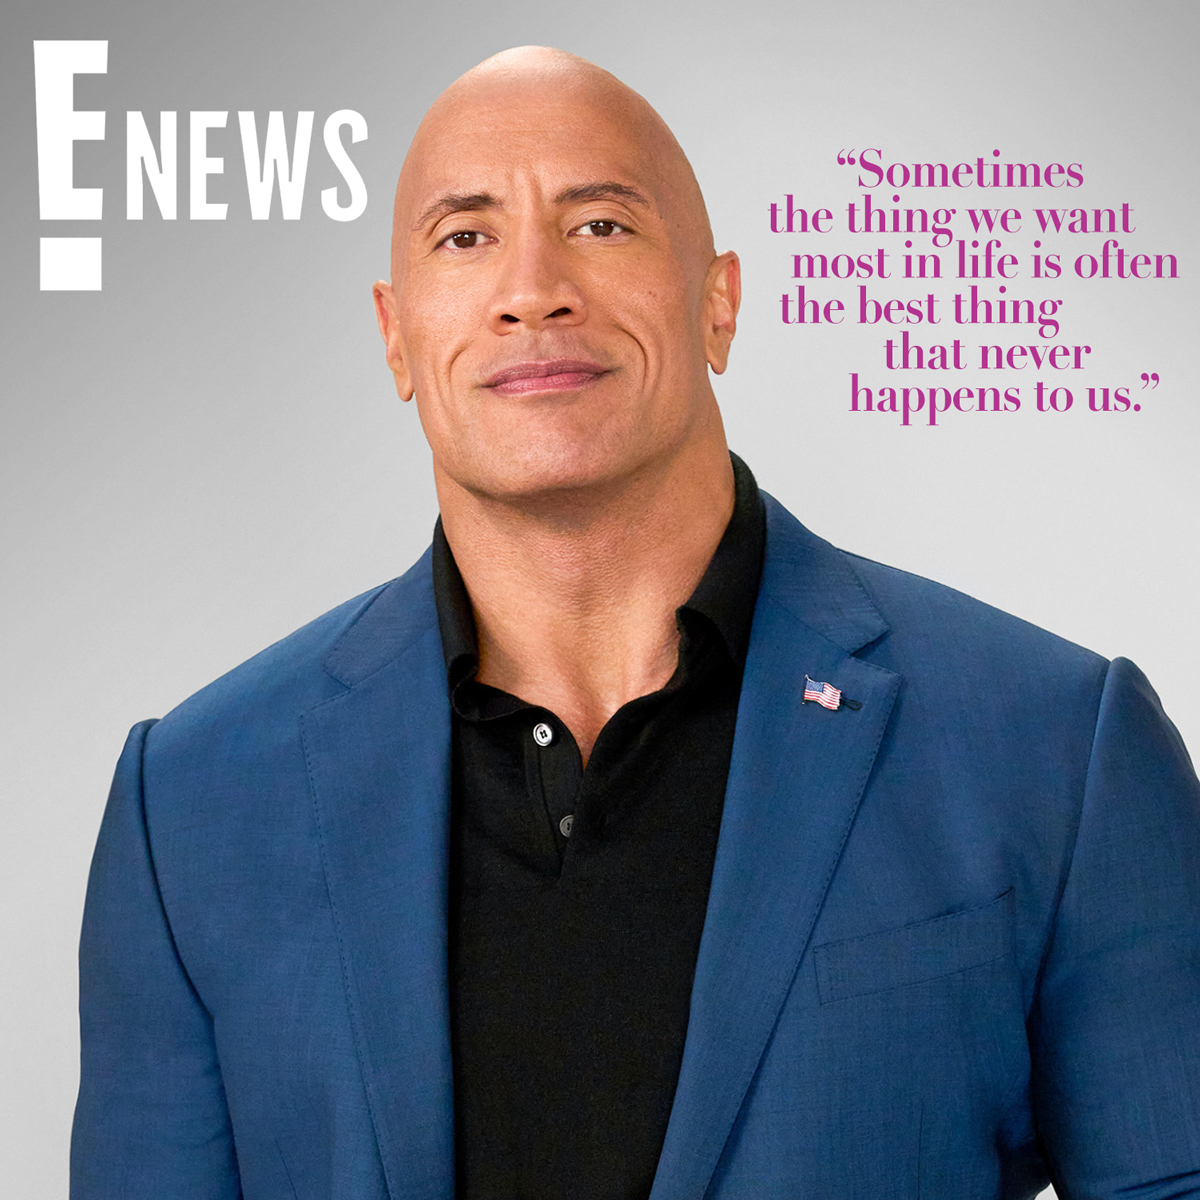 Dwayne 'The Rock' Johnson: The key to success and starting a business  during Covid